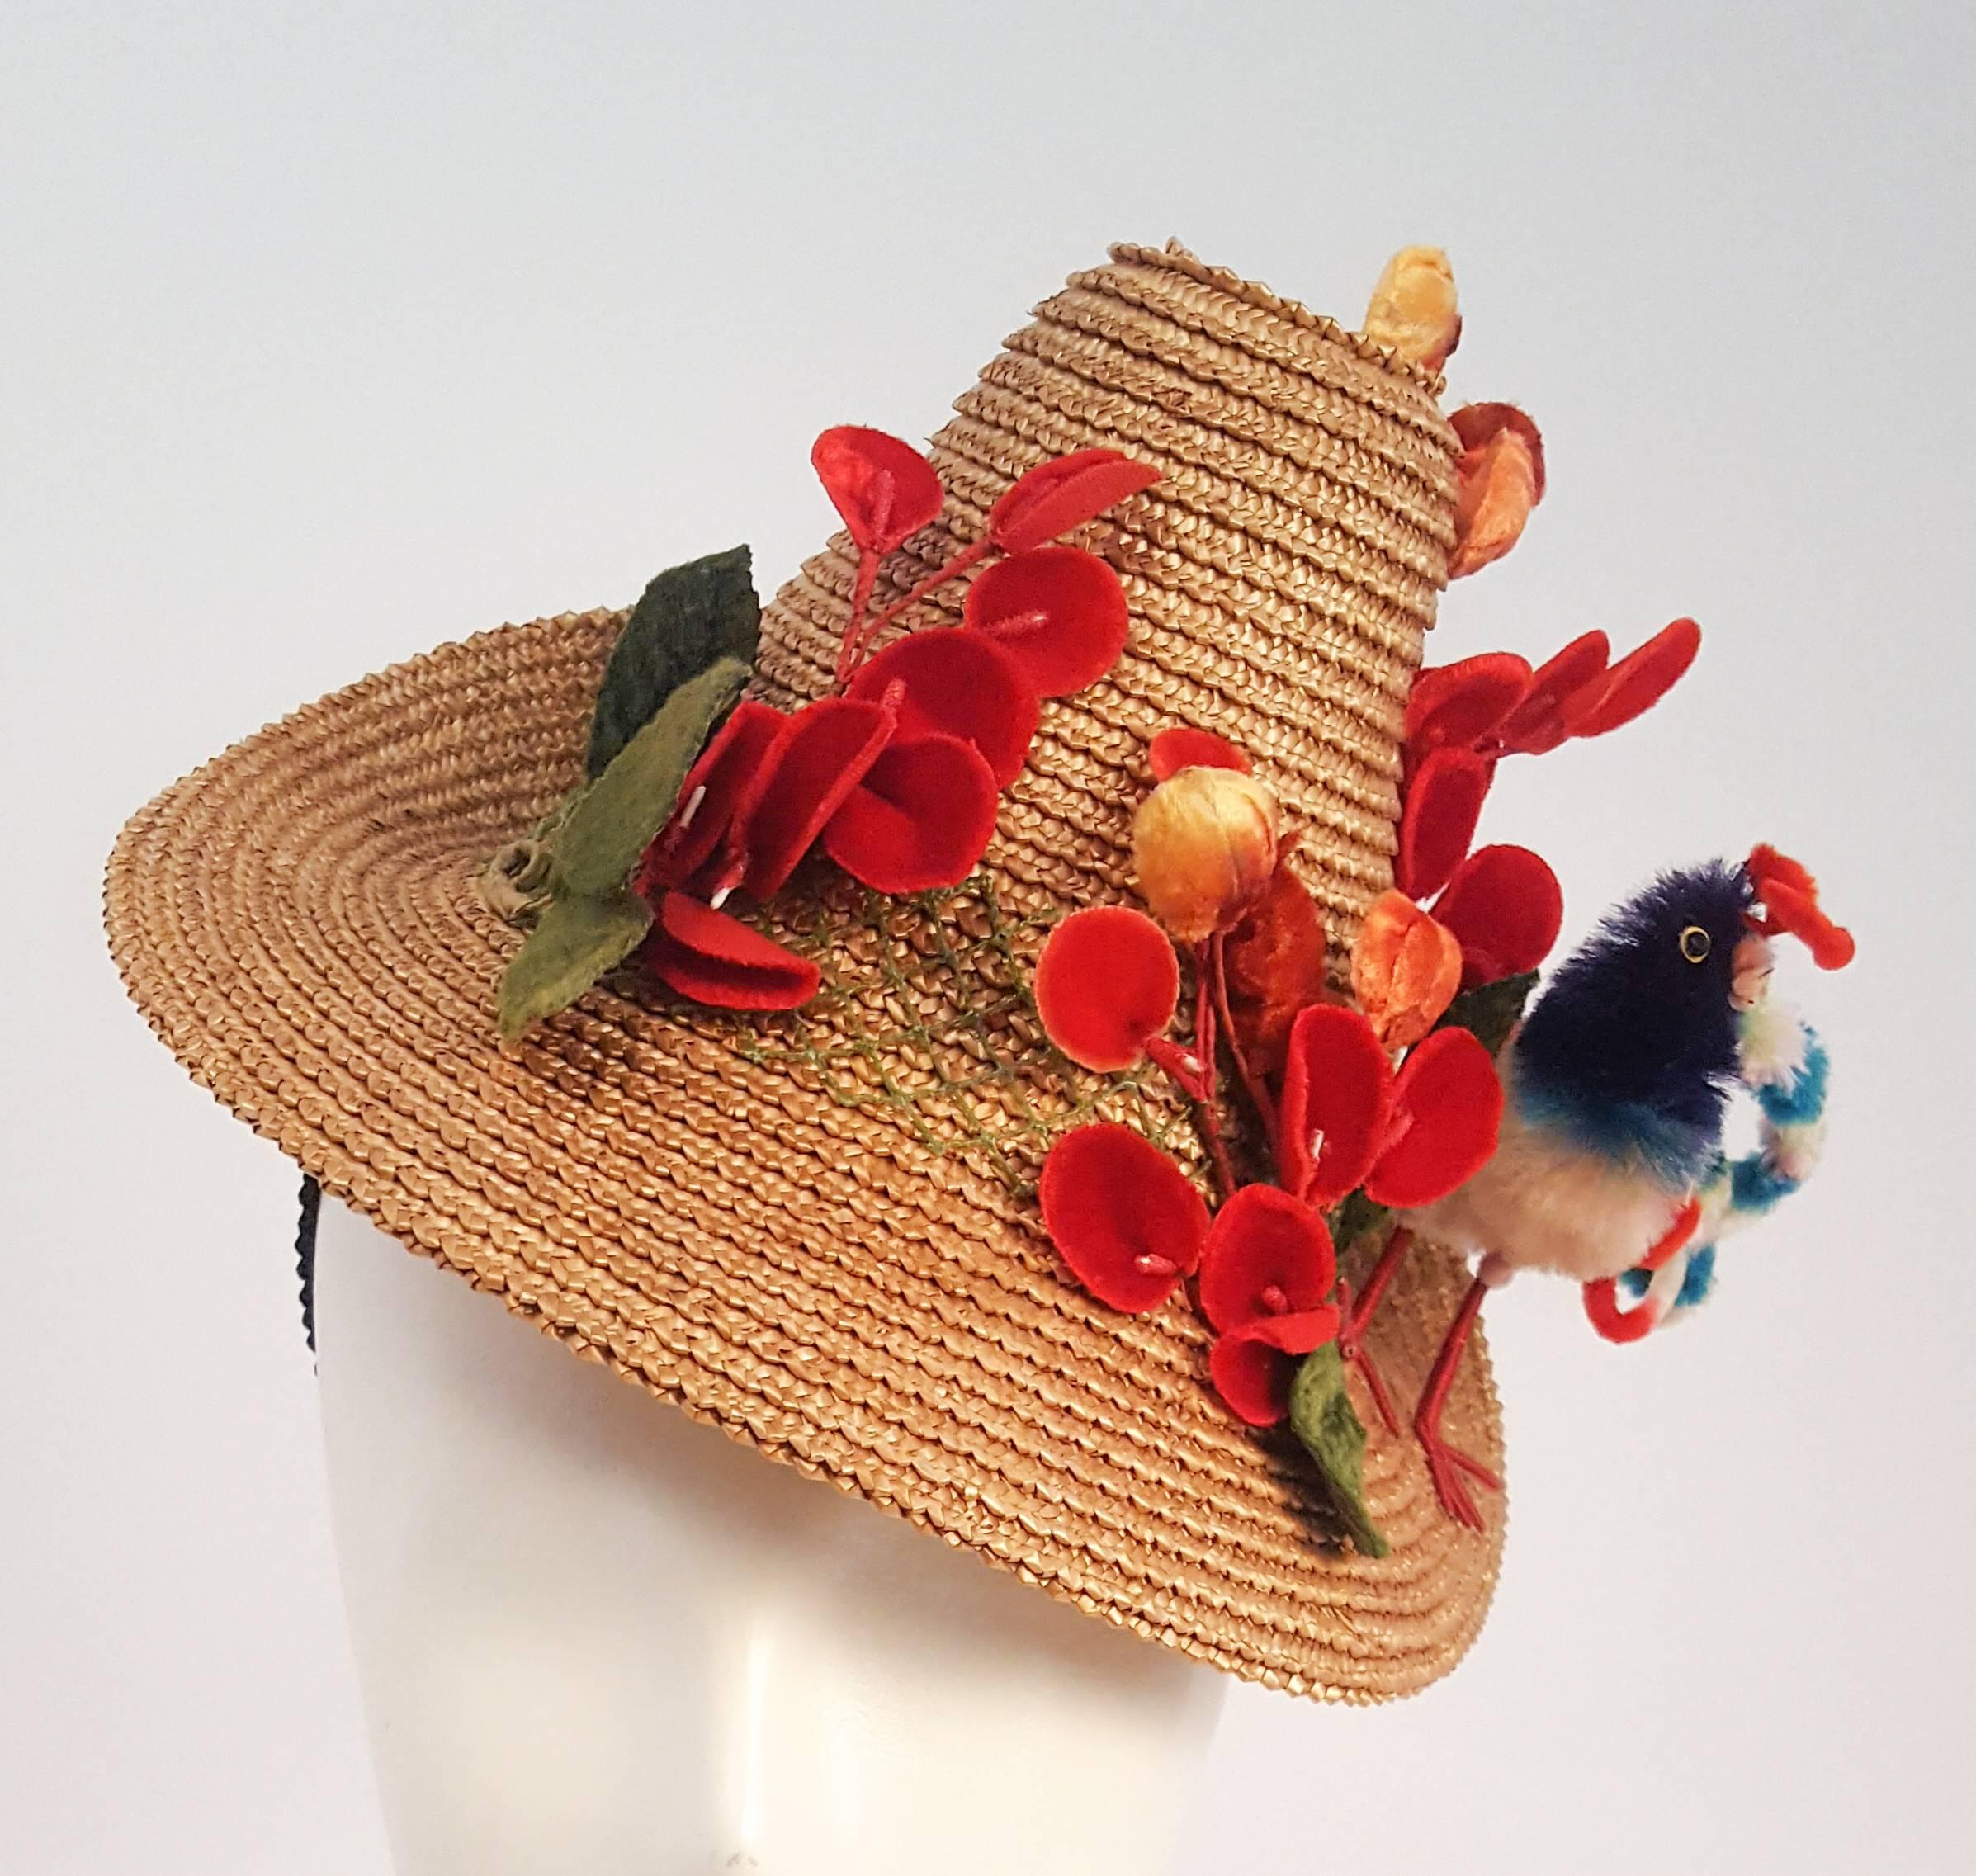 1940s Straw Hat w/ Bird and Flower Embellishment. Elastic band holds hat in place. 